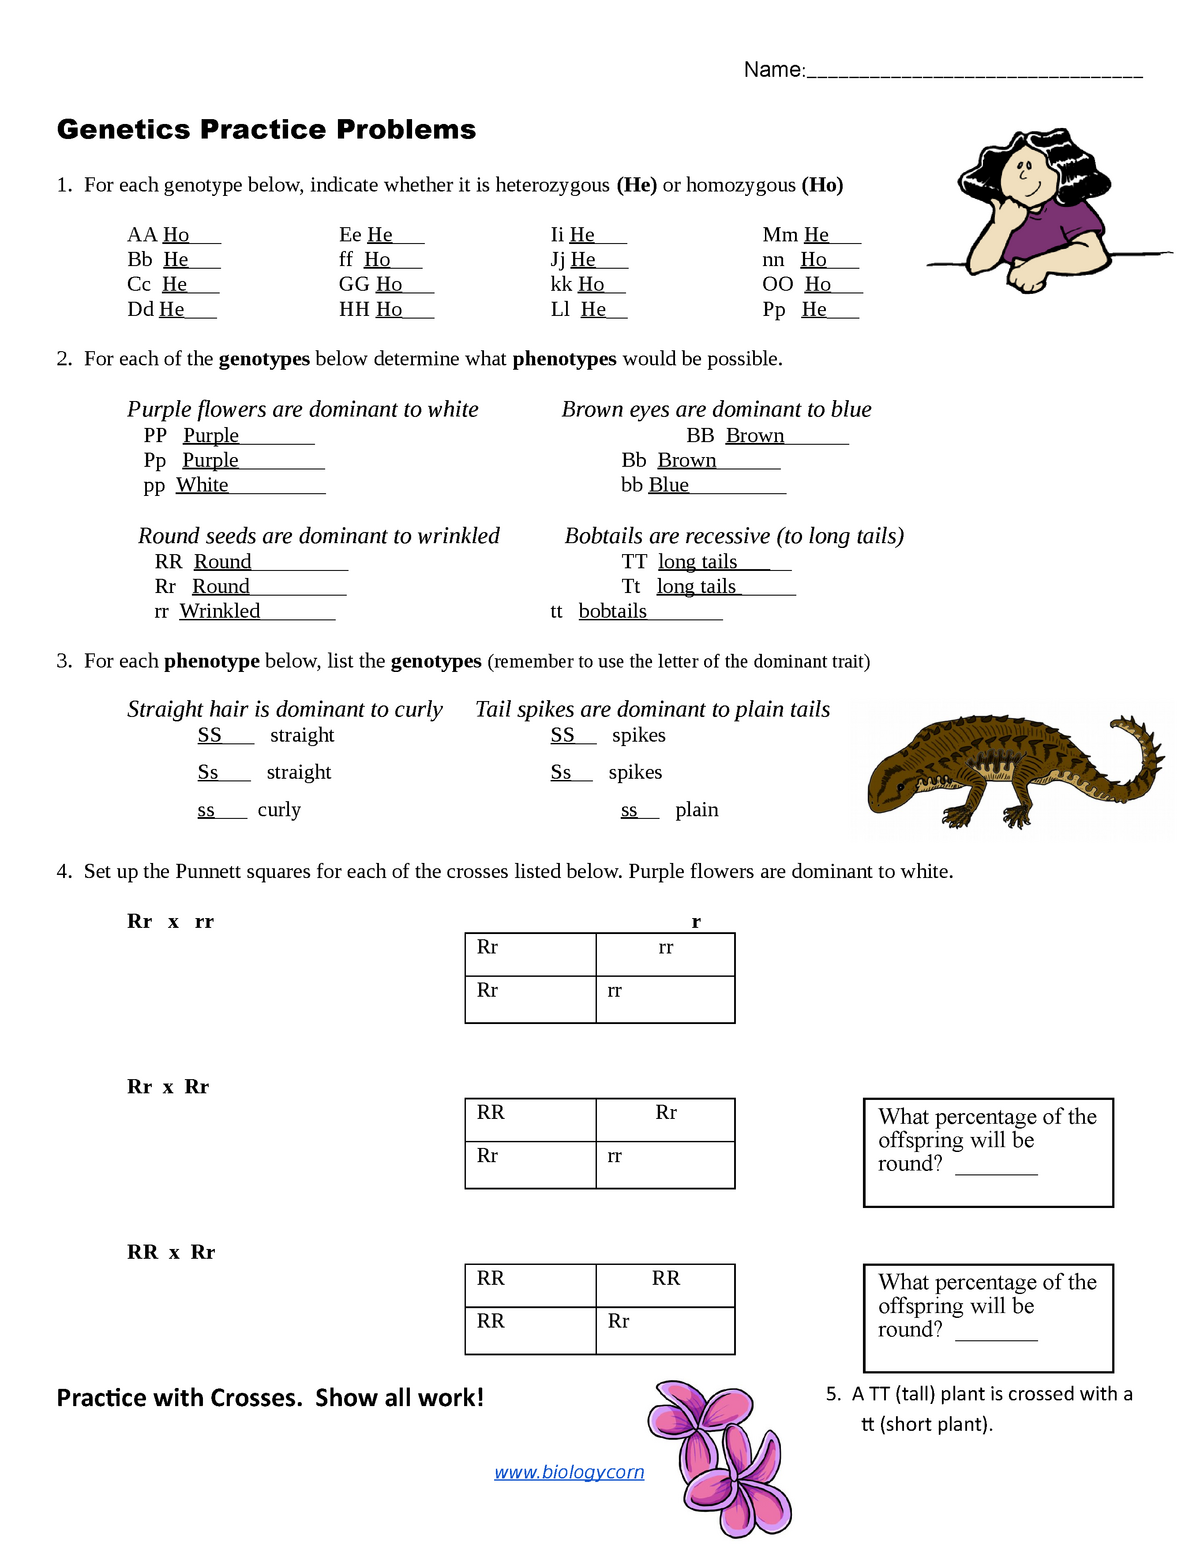 Copy of Practice - simple genetics - ENGL 11 - Science Fiction For Genetics Problems Worksheet Answer Key